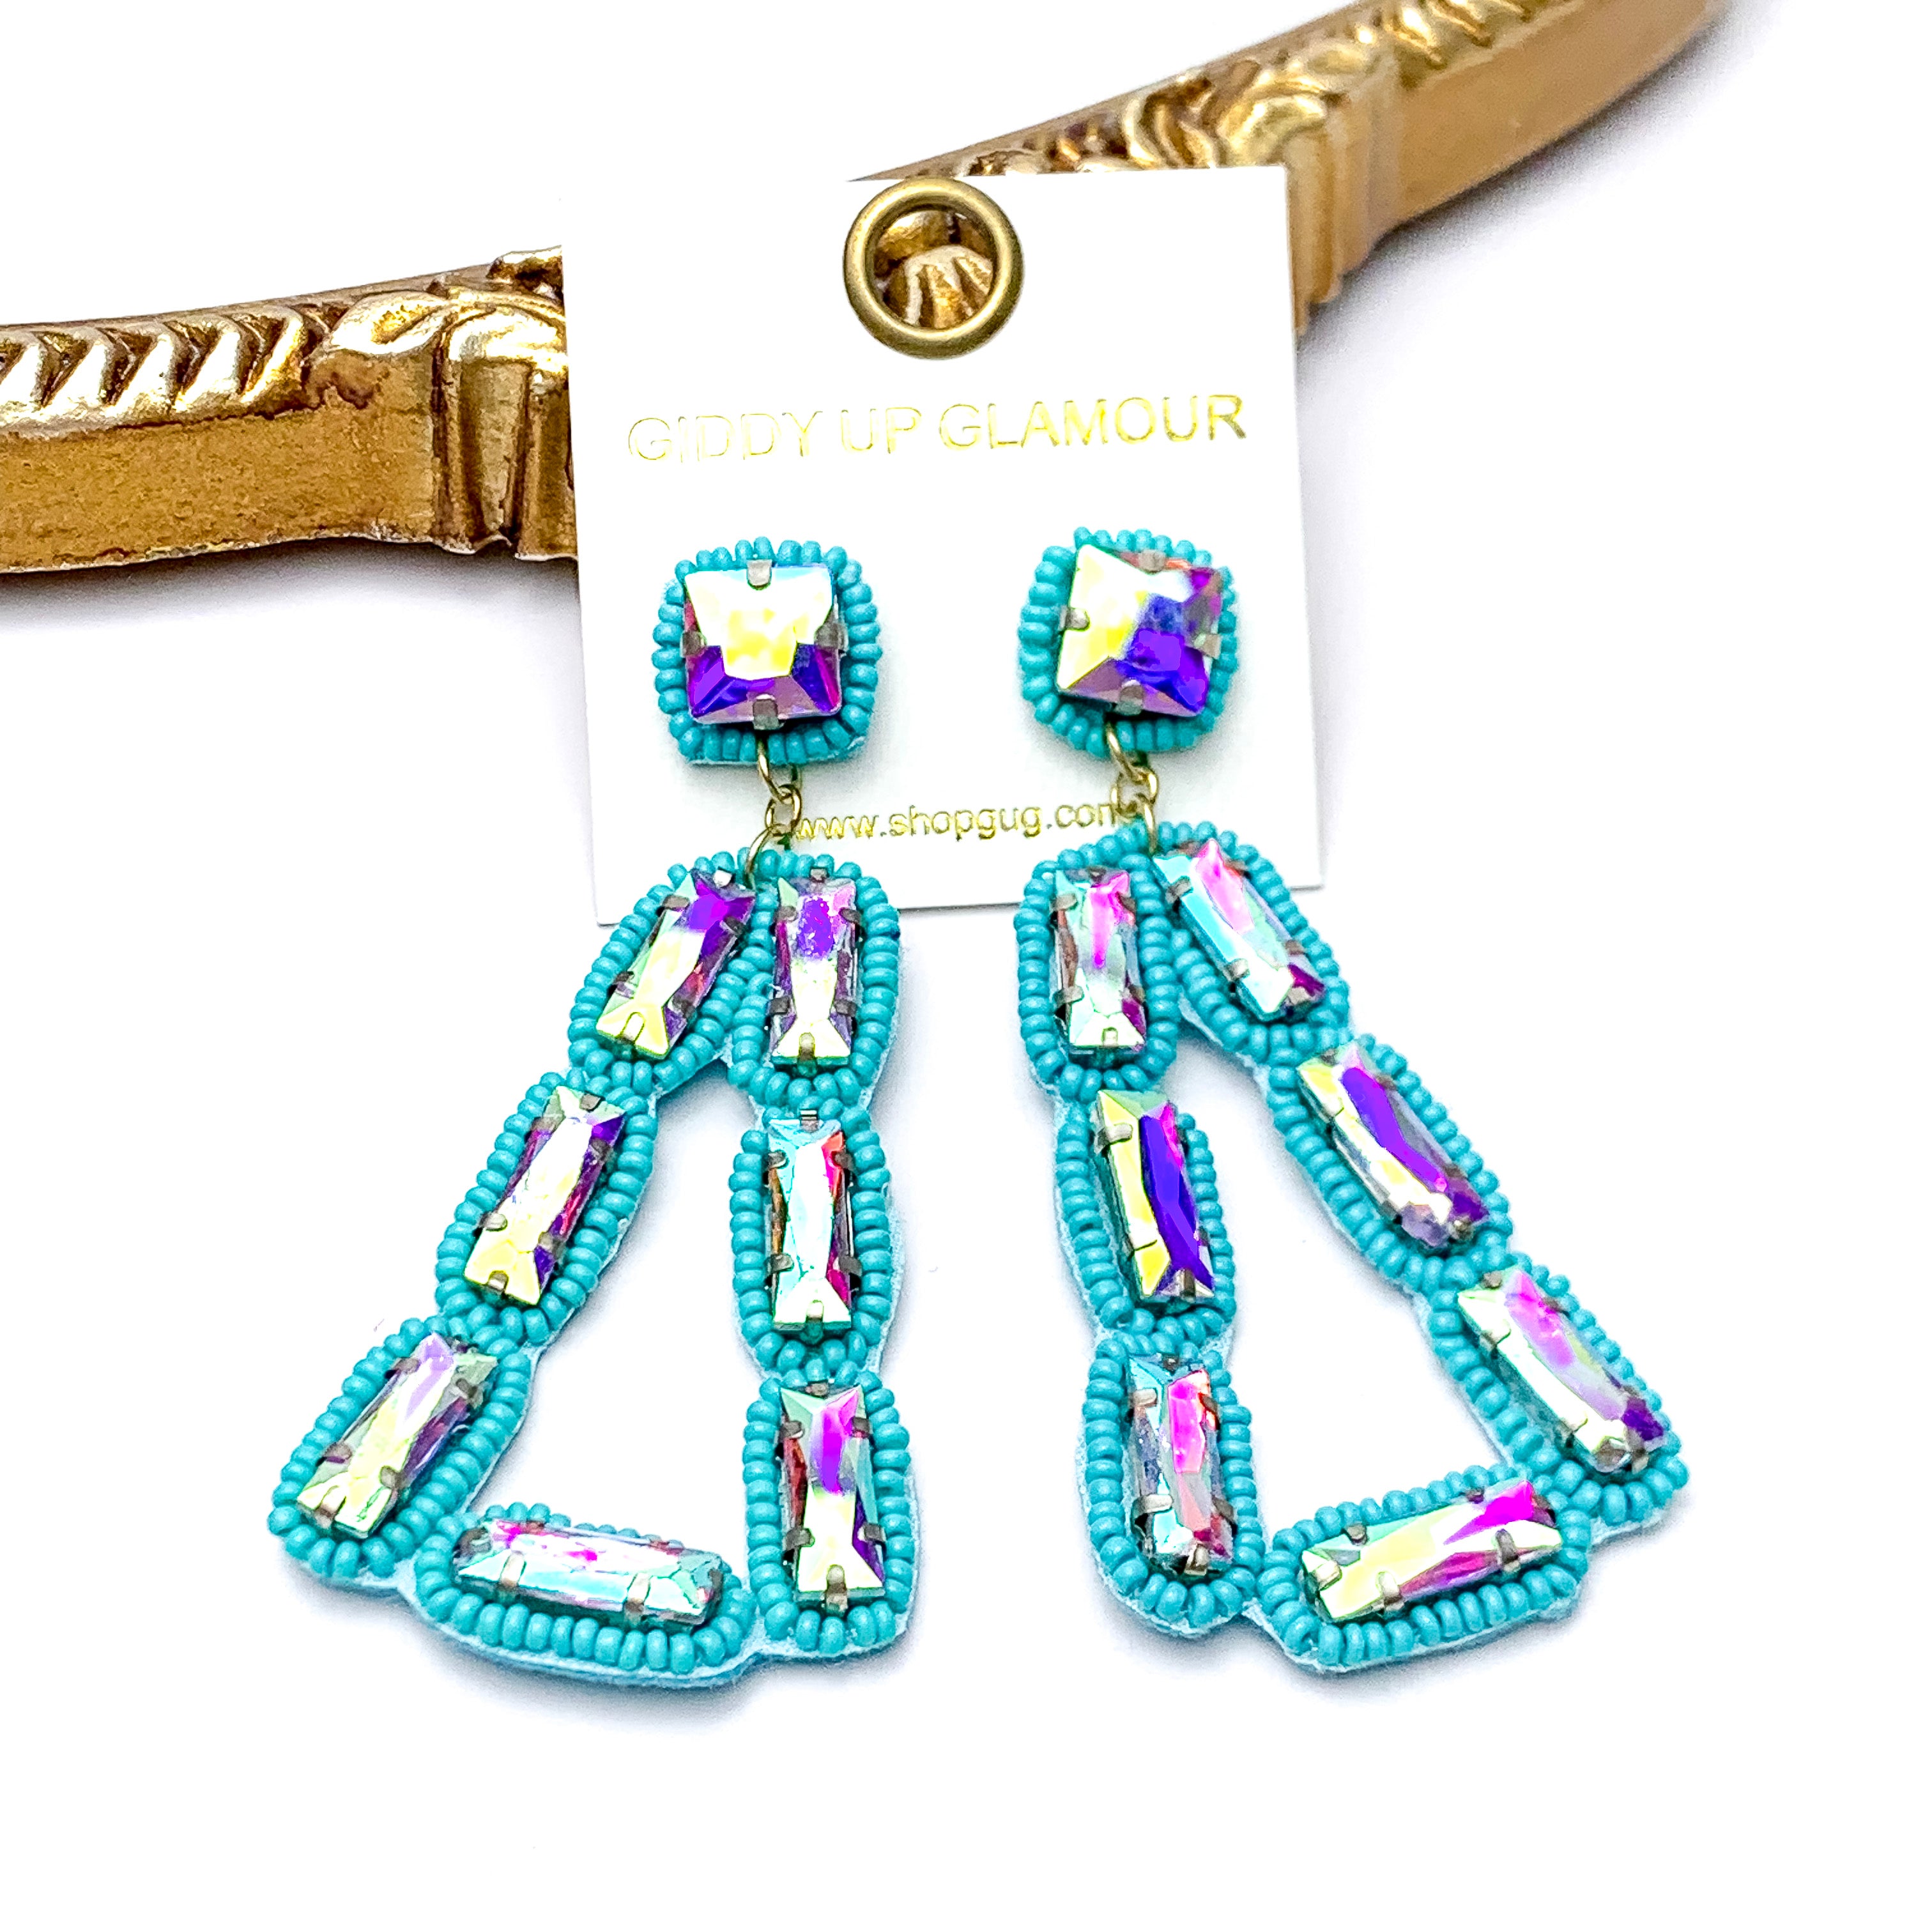 Vibrant Vistas Triangular Seed Bead Drop Earrings with AB Stones in Turquoise